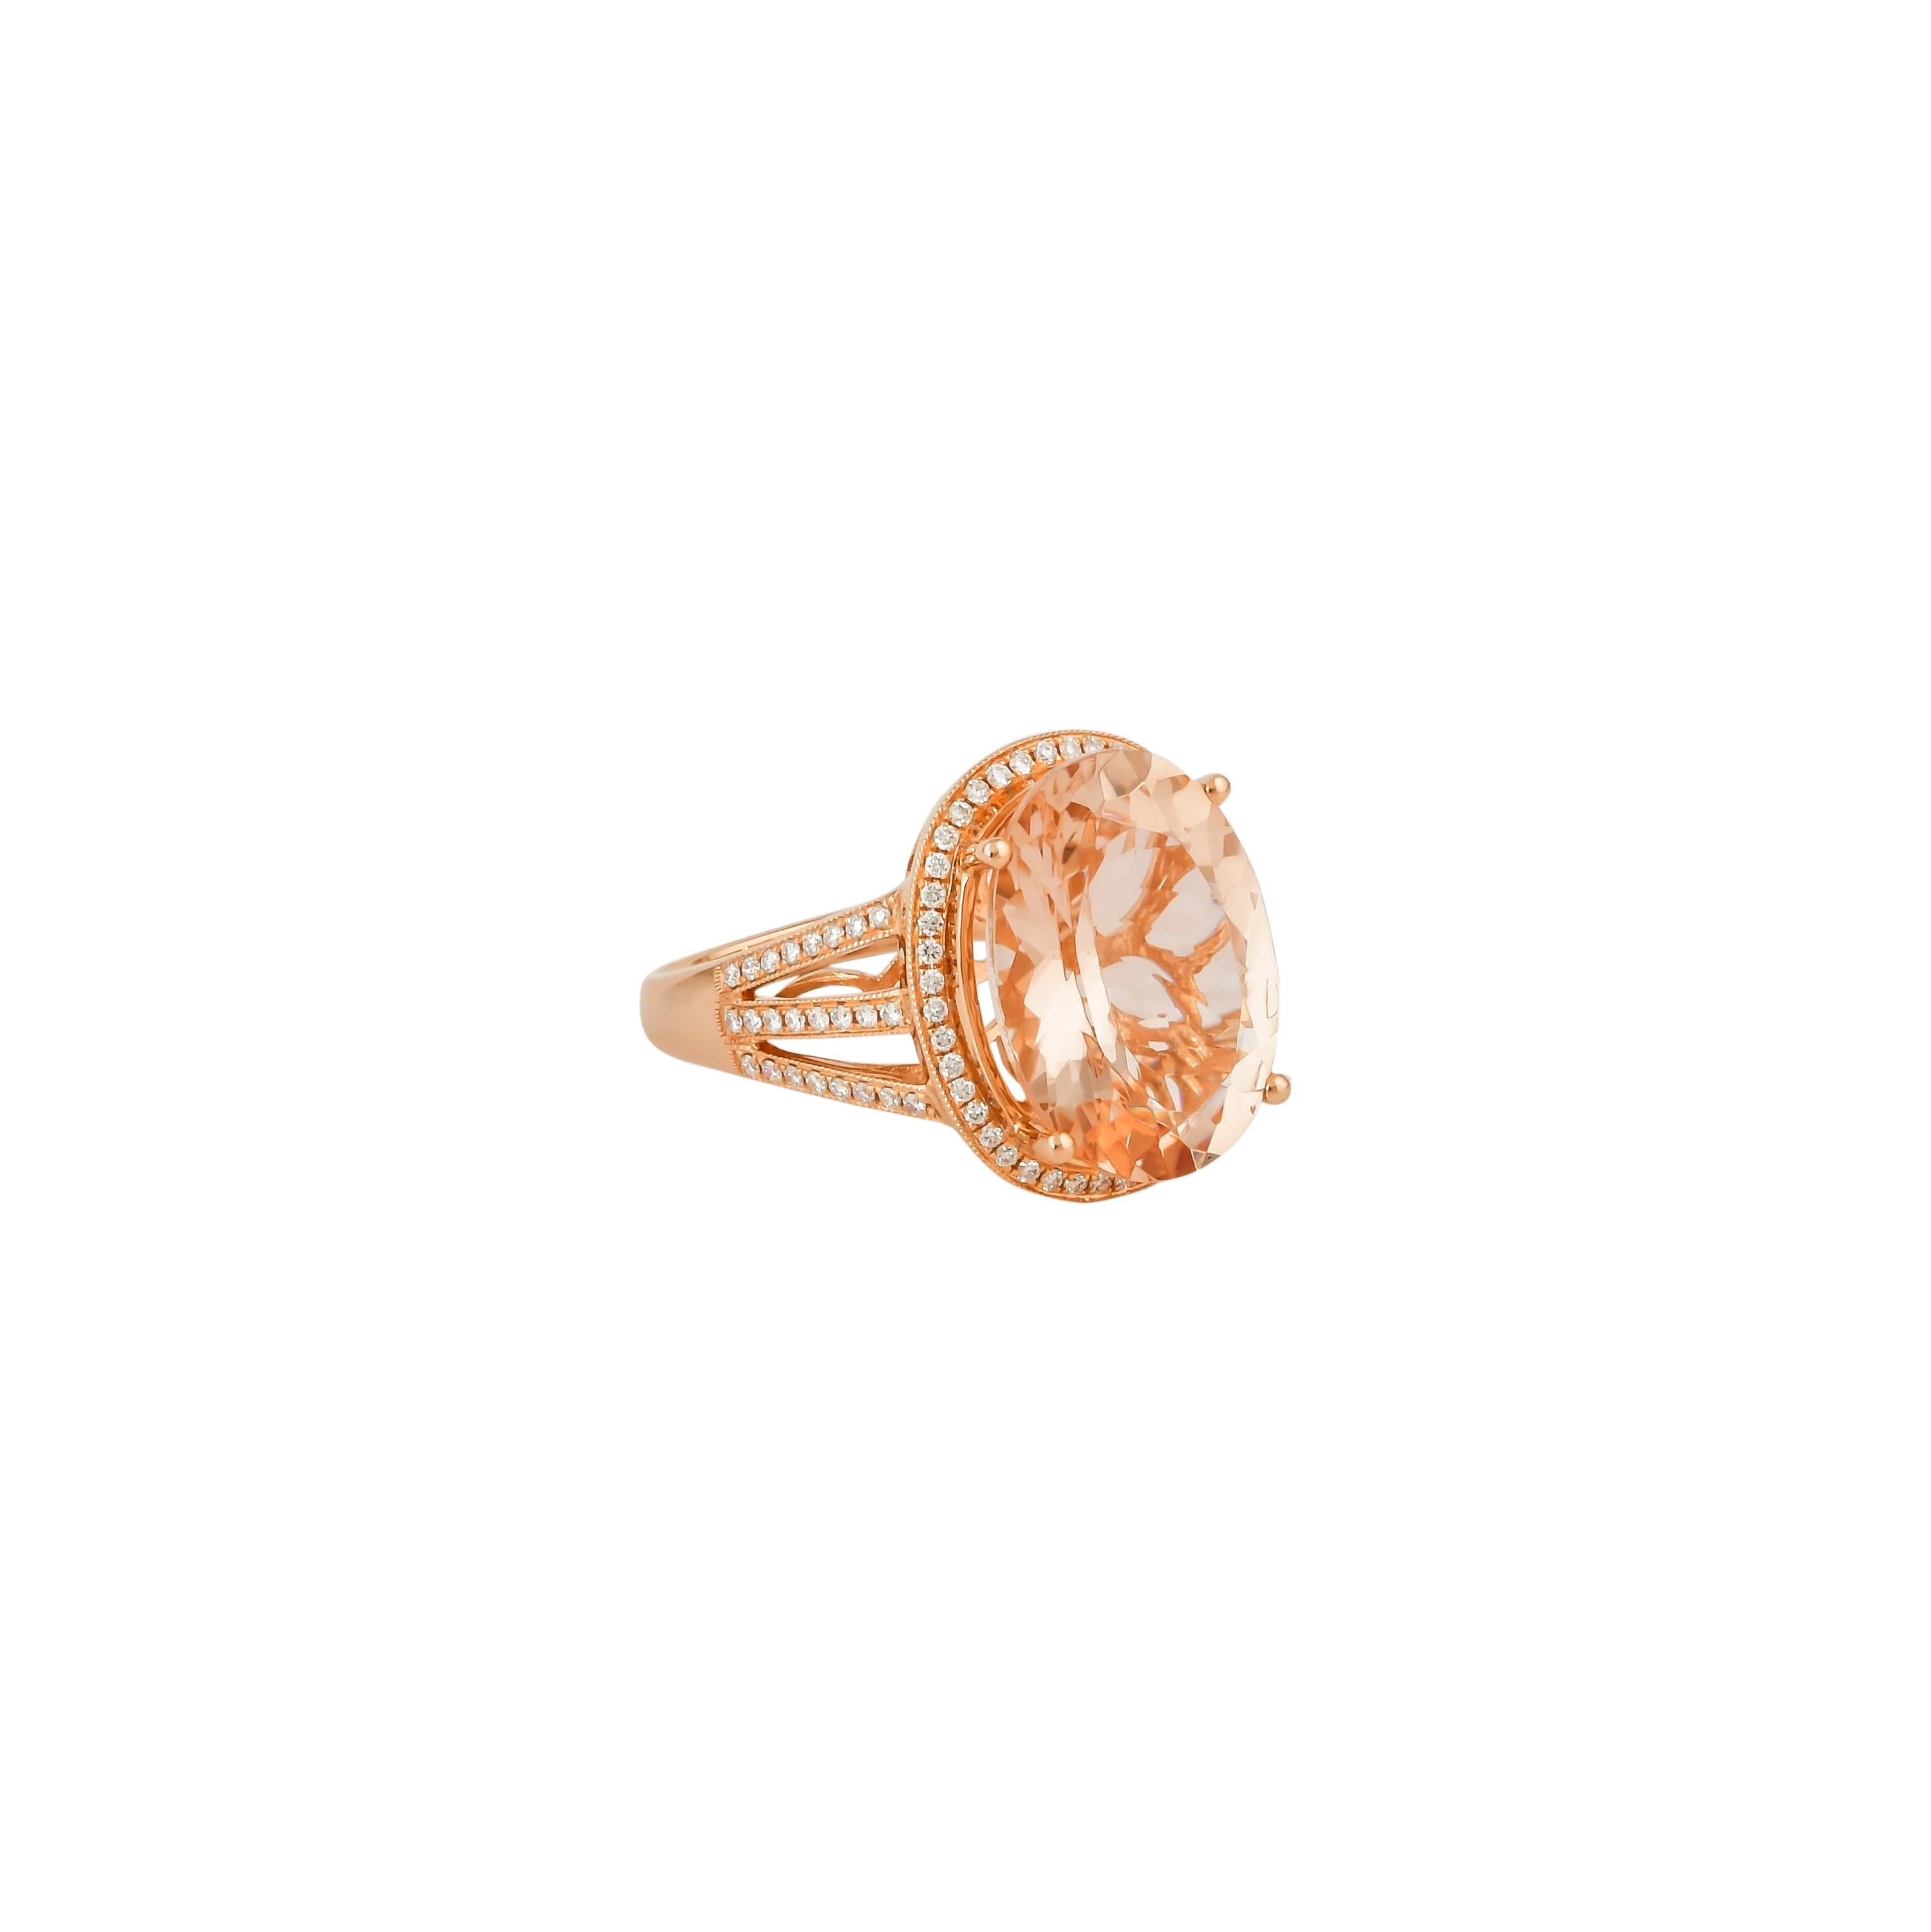 This collection features an array of magnificent morganites! Accented with diamonds these rings are made in rose gold and present a classic yet elegant look. 

Classic morganite ring in 18K rose gold with diamonds. 

Morganite: 7.42 carat oval